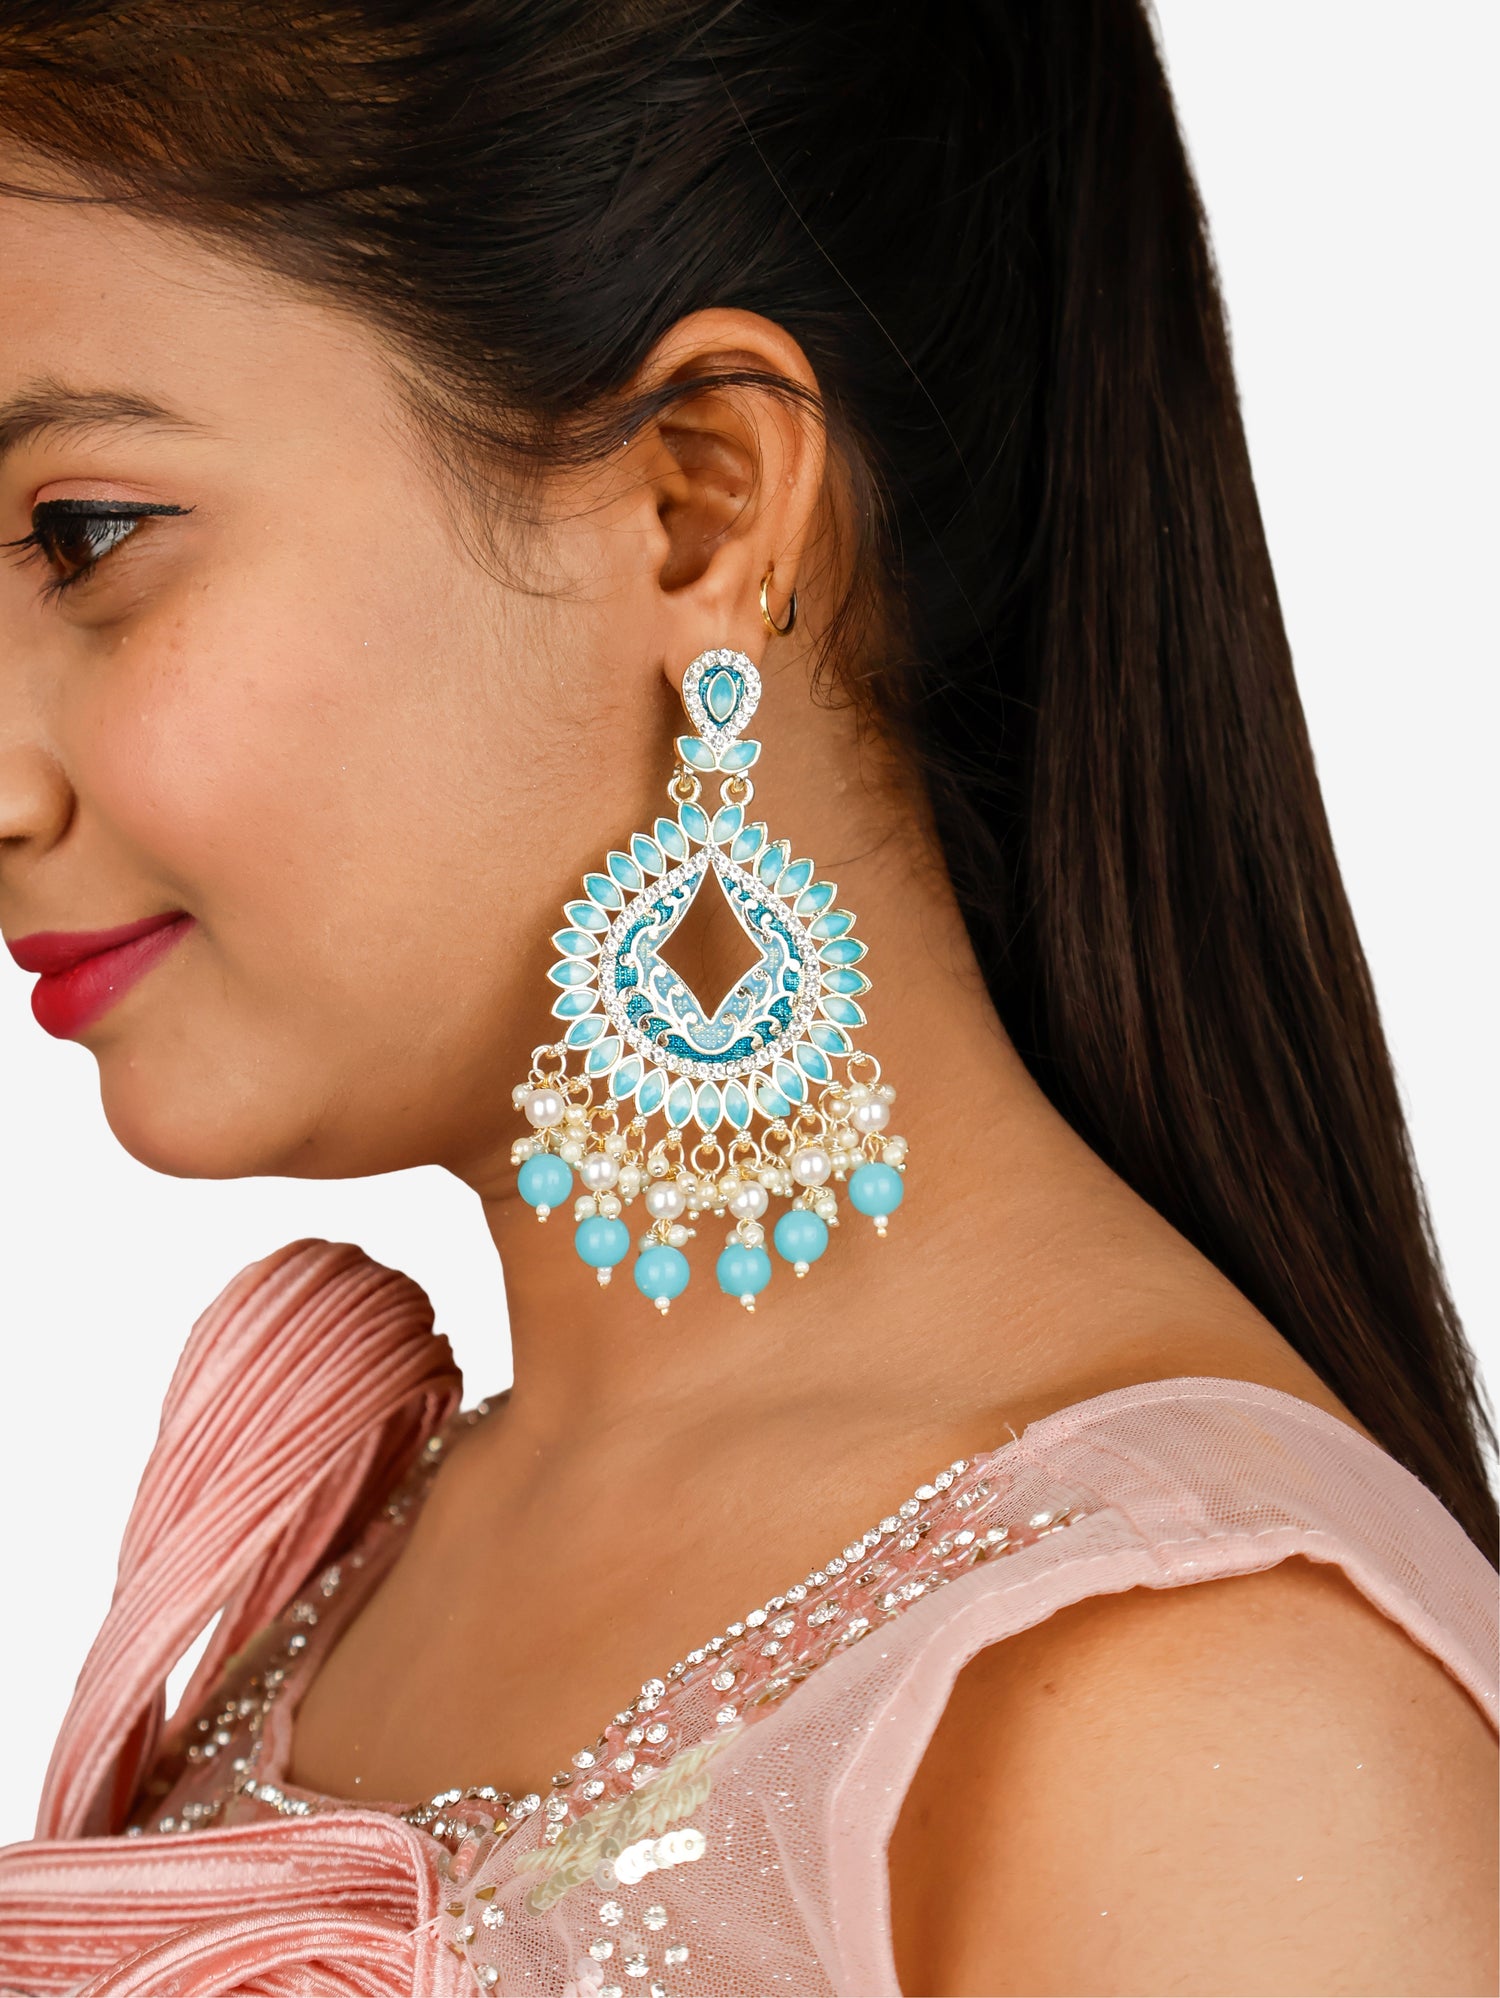 Gold-Toned &amp; Chandbali Earrings with Crystals and Pearls for Women by Shreekama Sky Blue Fashion Jewelry for Party Festival Wedding Occasion in Noida